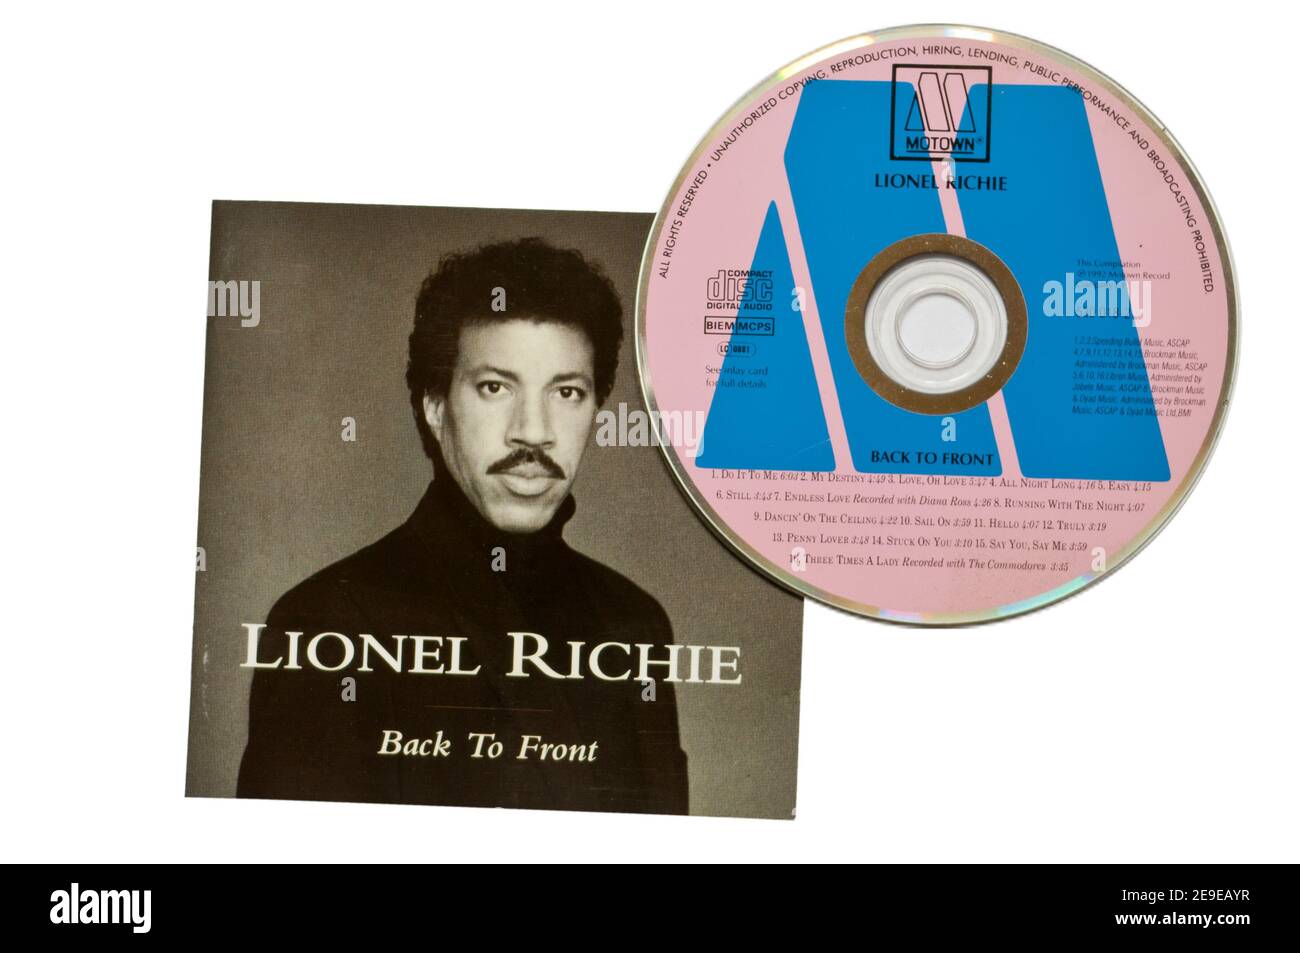 Lionel Richie Back To Front Music CD Compact Disc Stock Photo